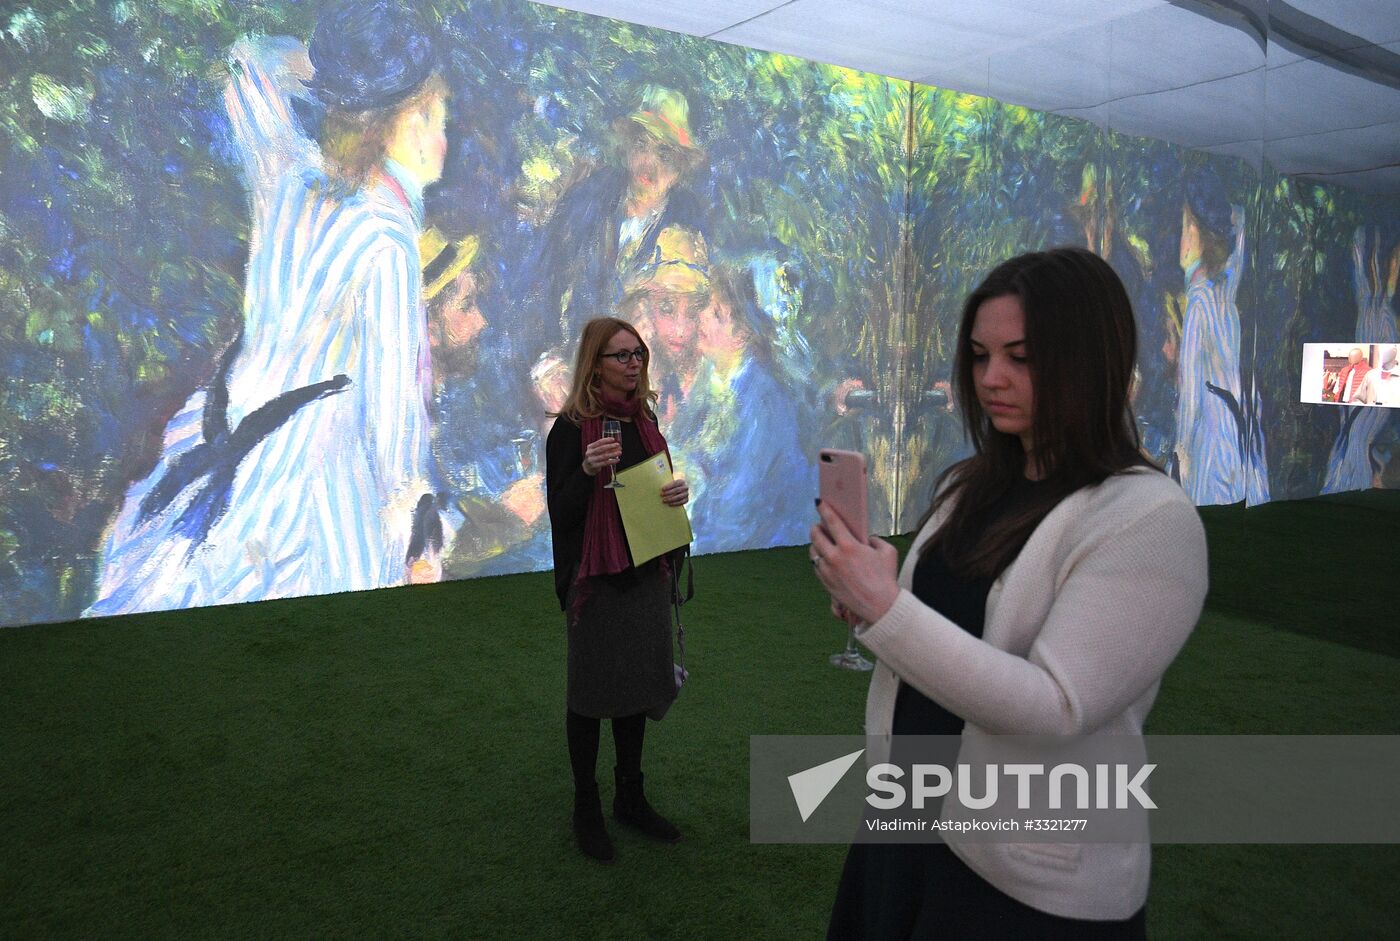 Luncheon on the Grass multimedia exhibition opens